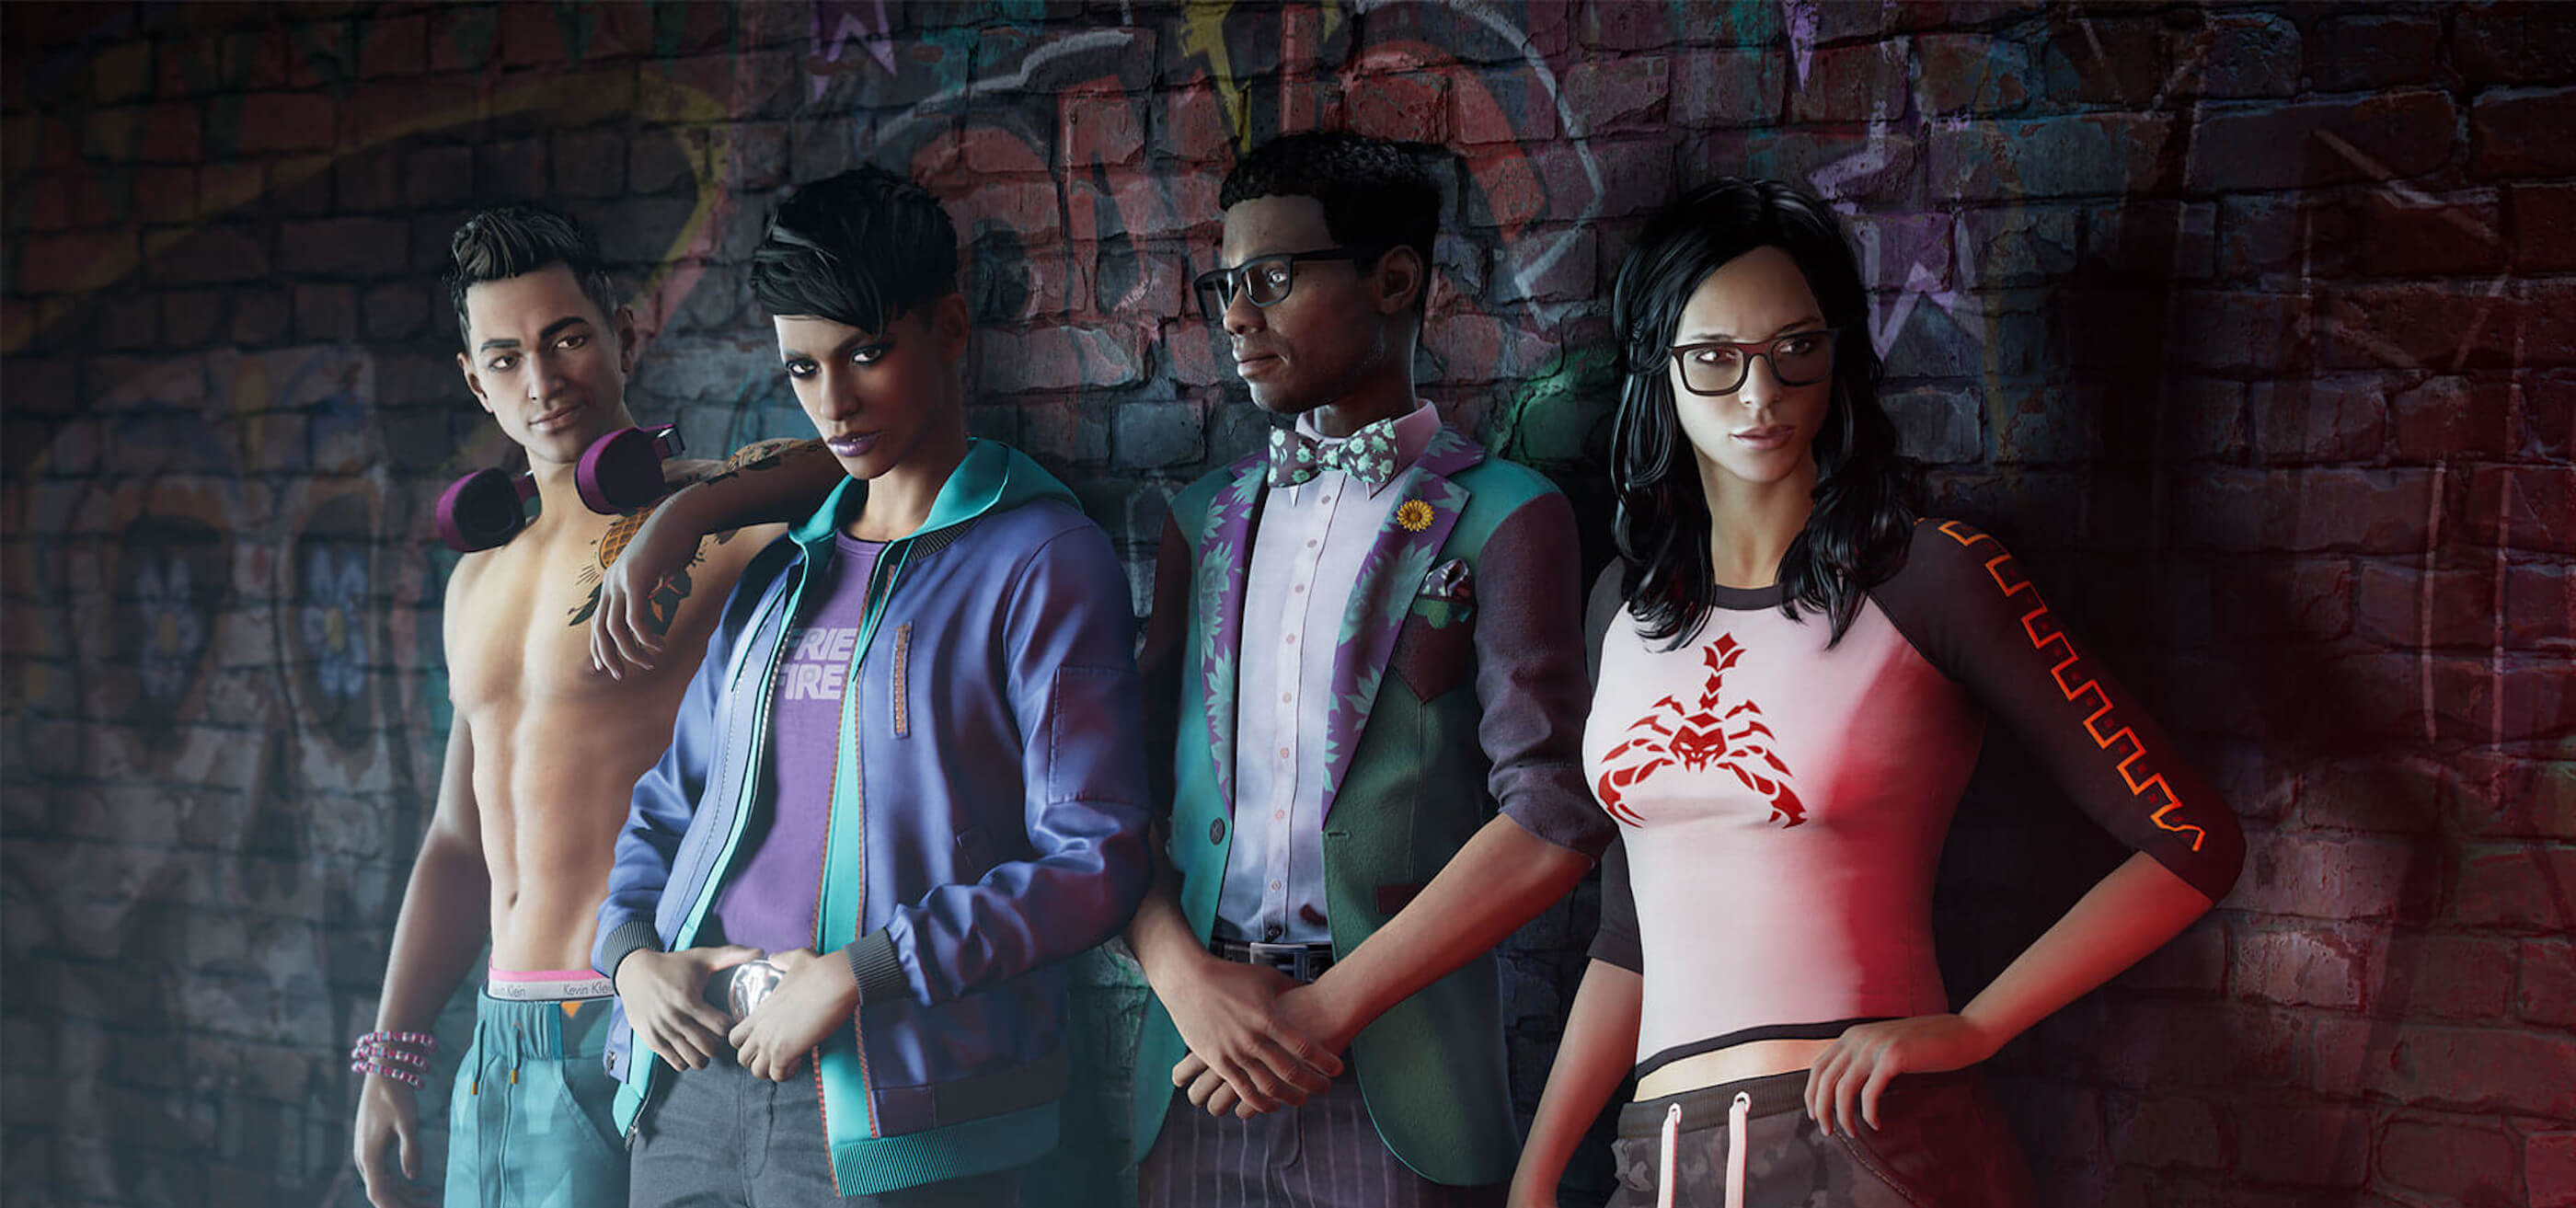 Four Saints Row IV characters pose against a brick wall with graffiti on it